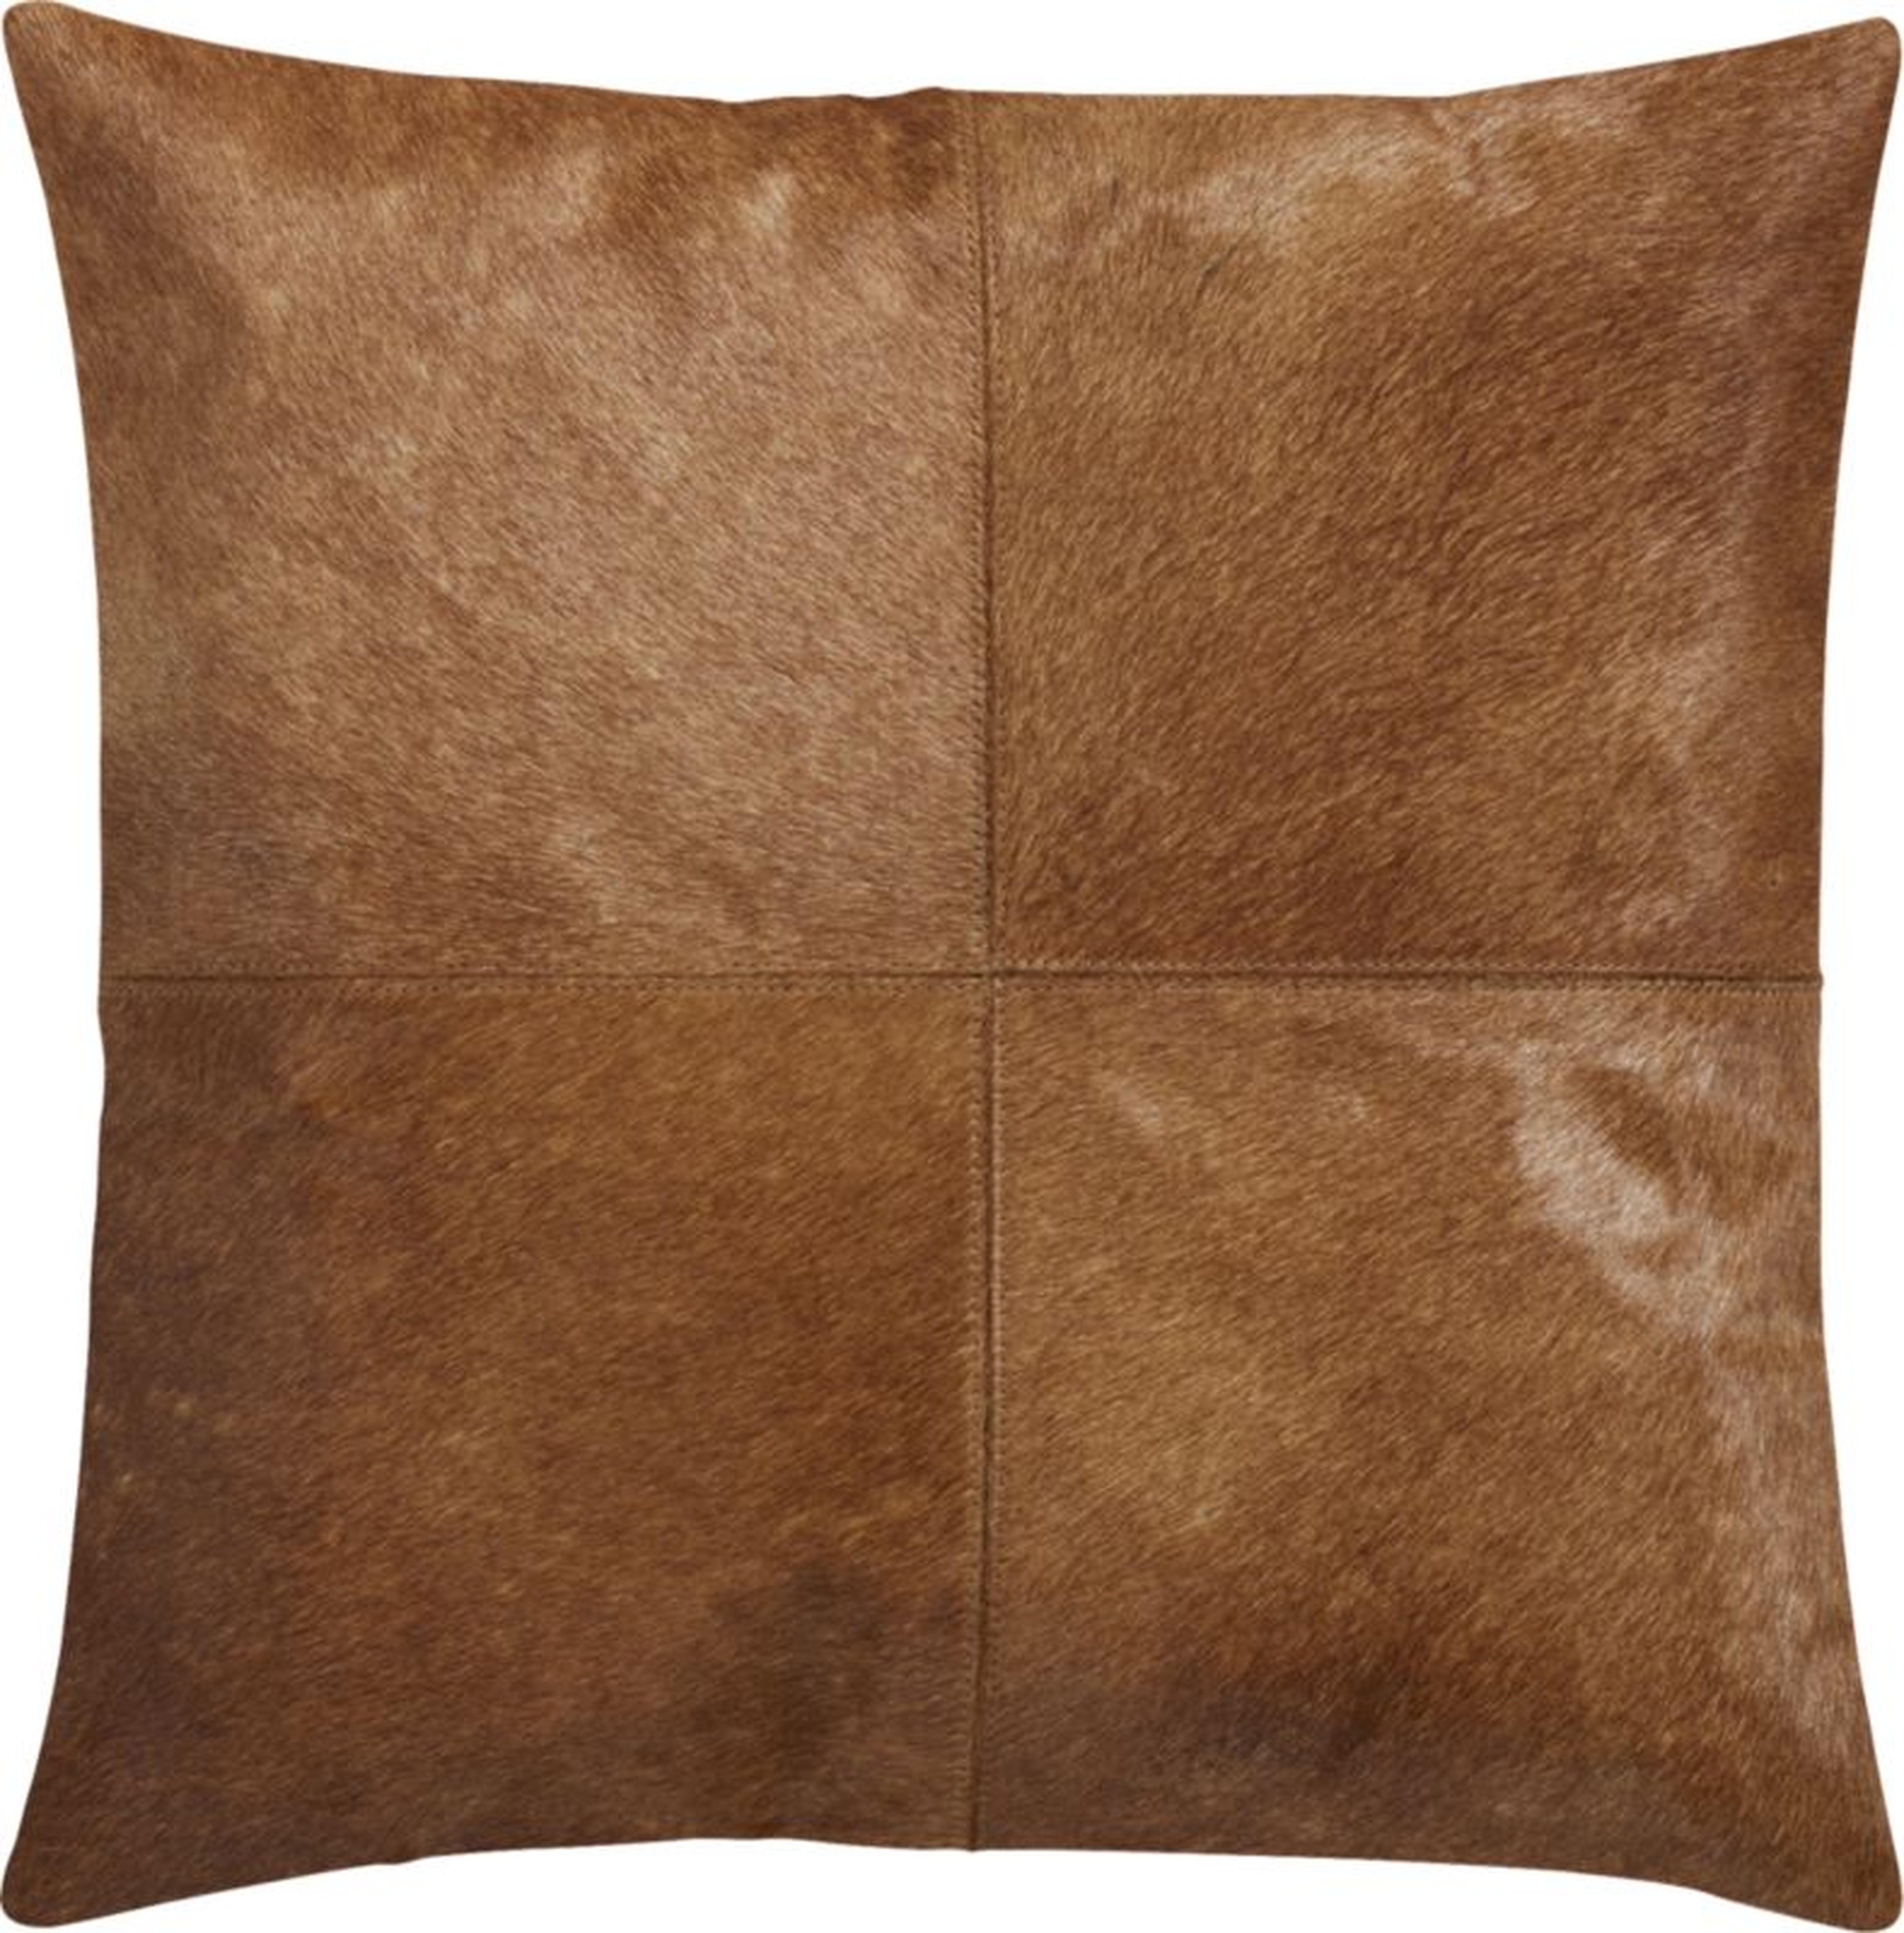 18" Abele Brown Cowhide Pillow with Down-Alternative Insert - CB2